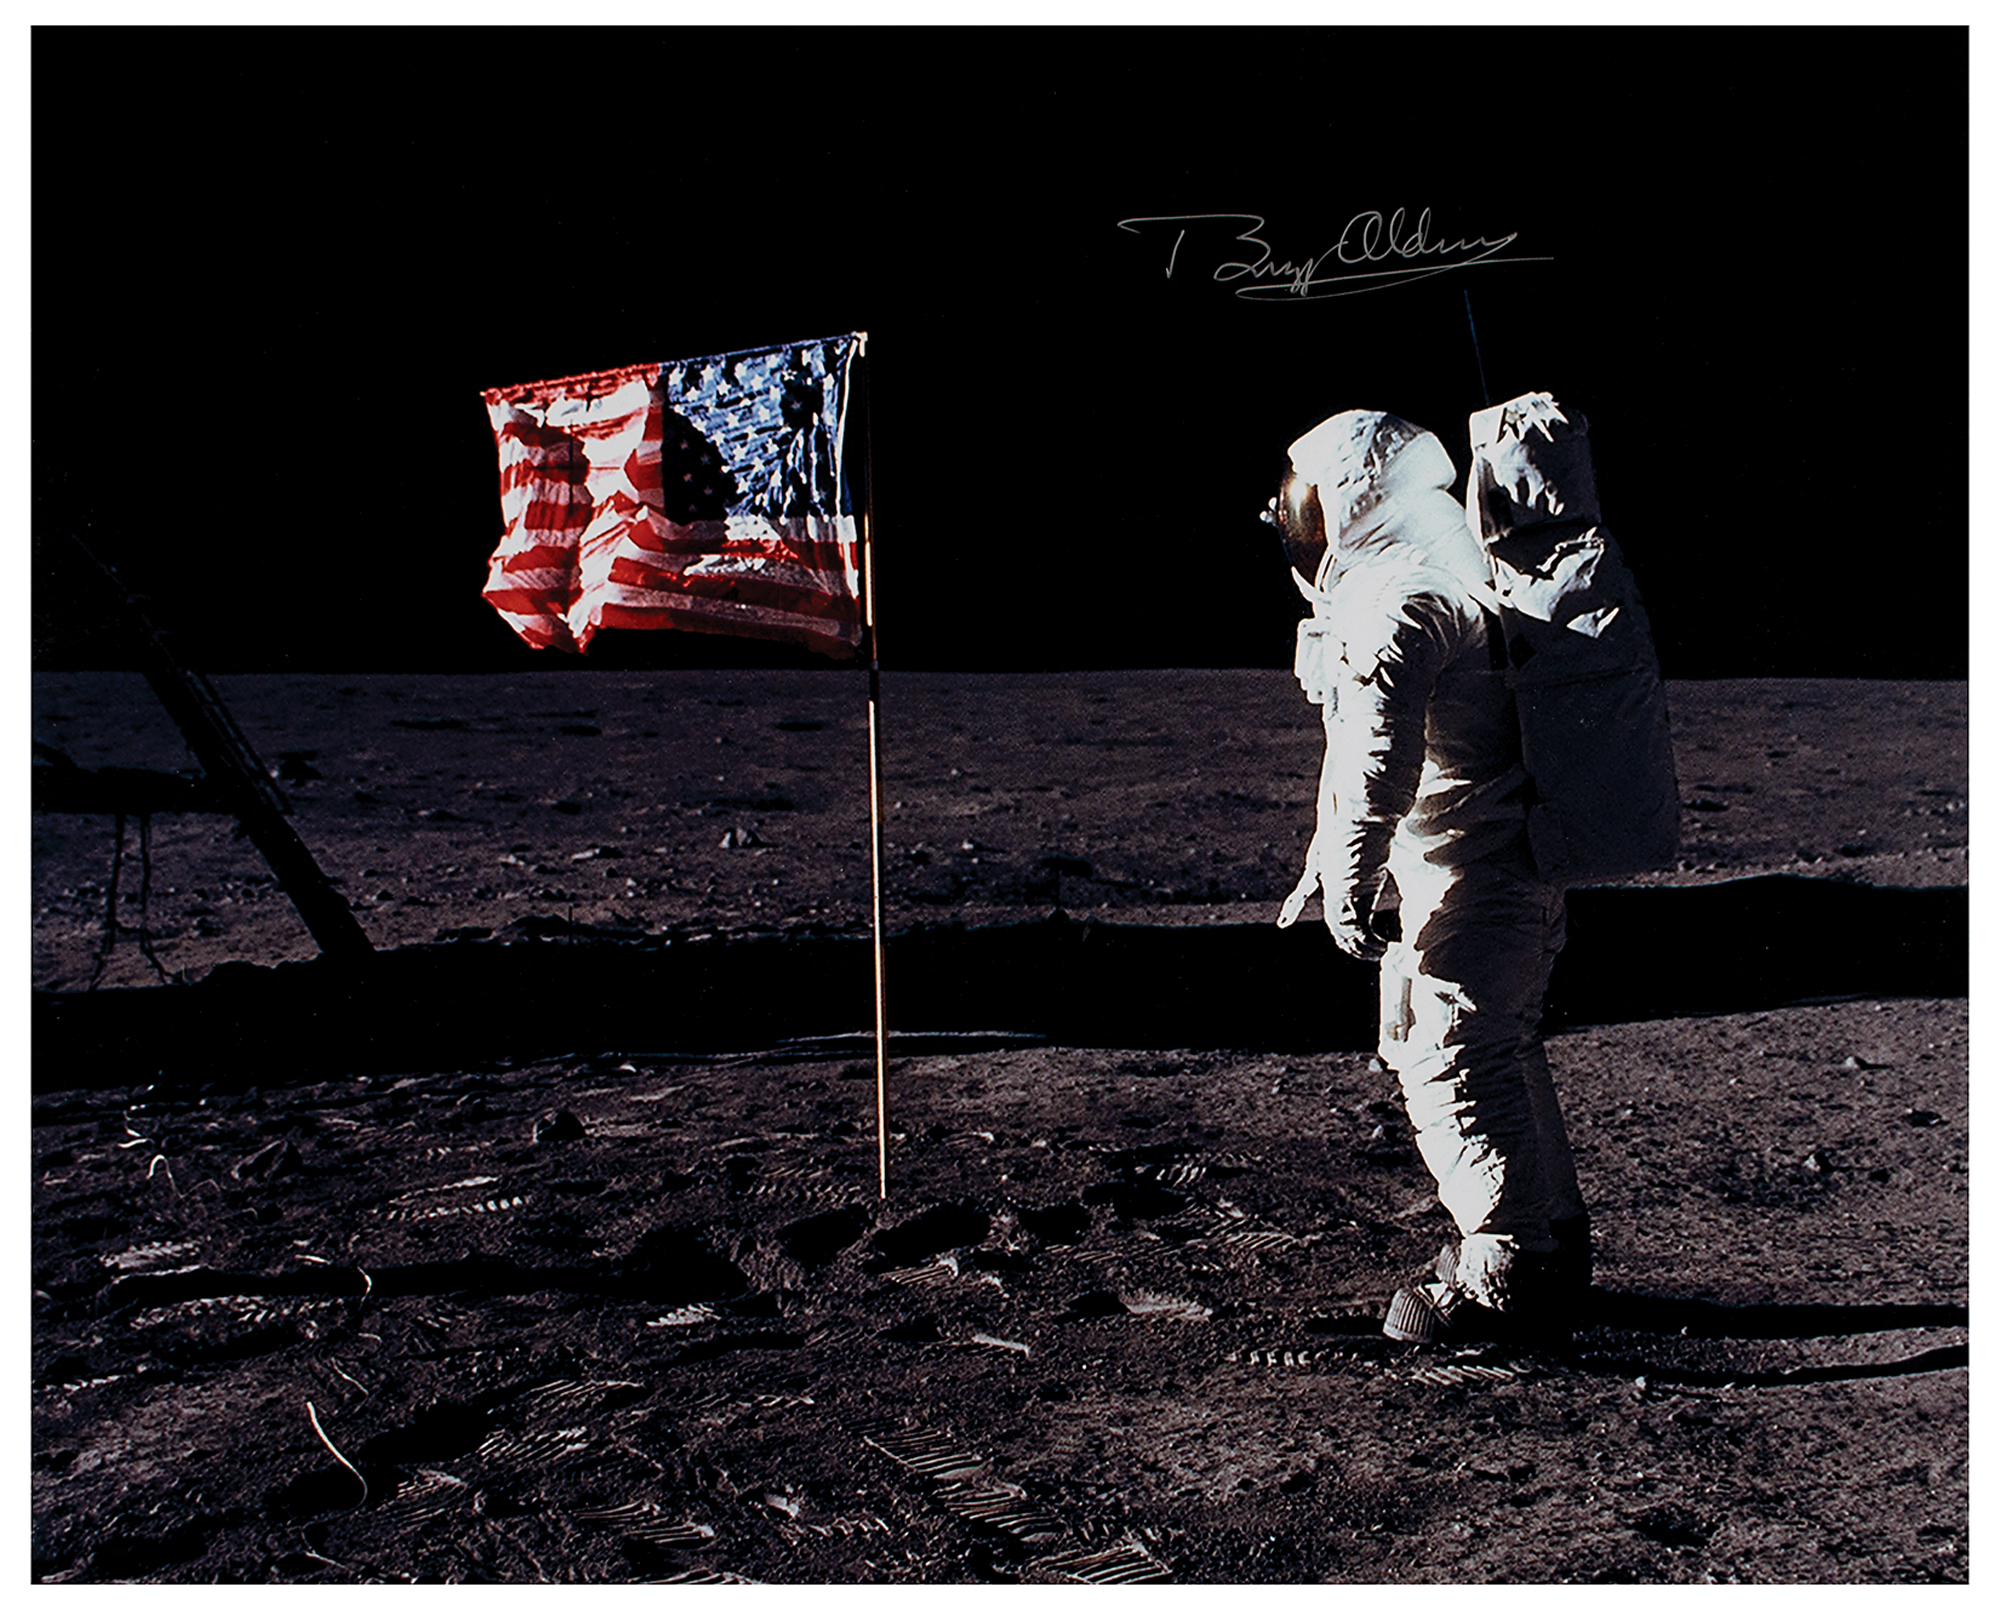 Lot #367 Buzz Aldrin Signed Oversized Photograph